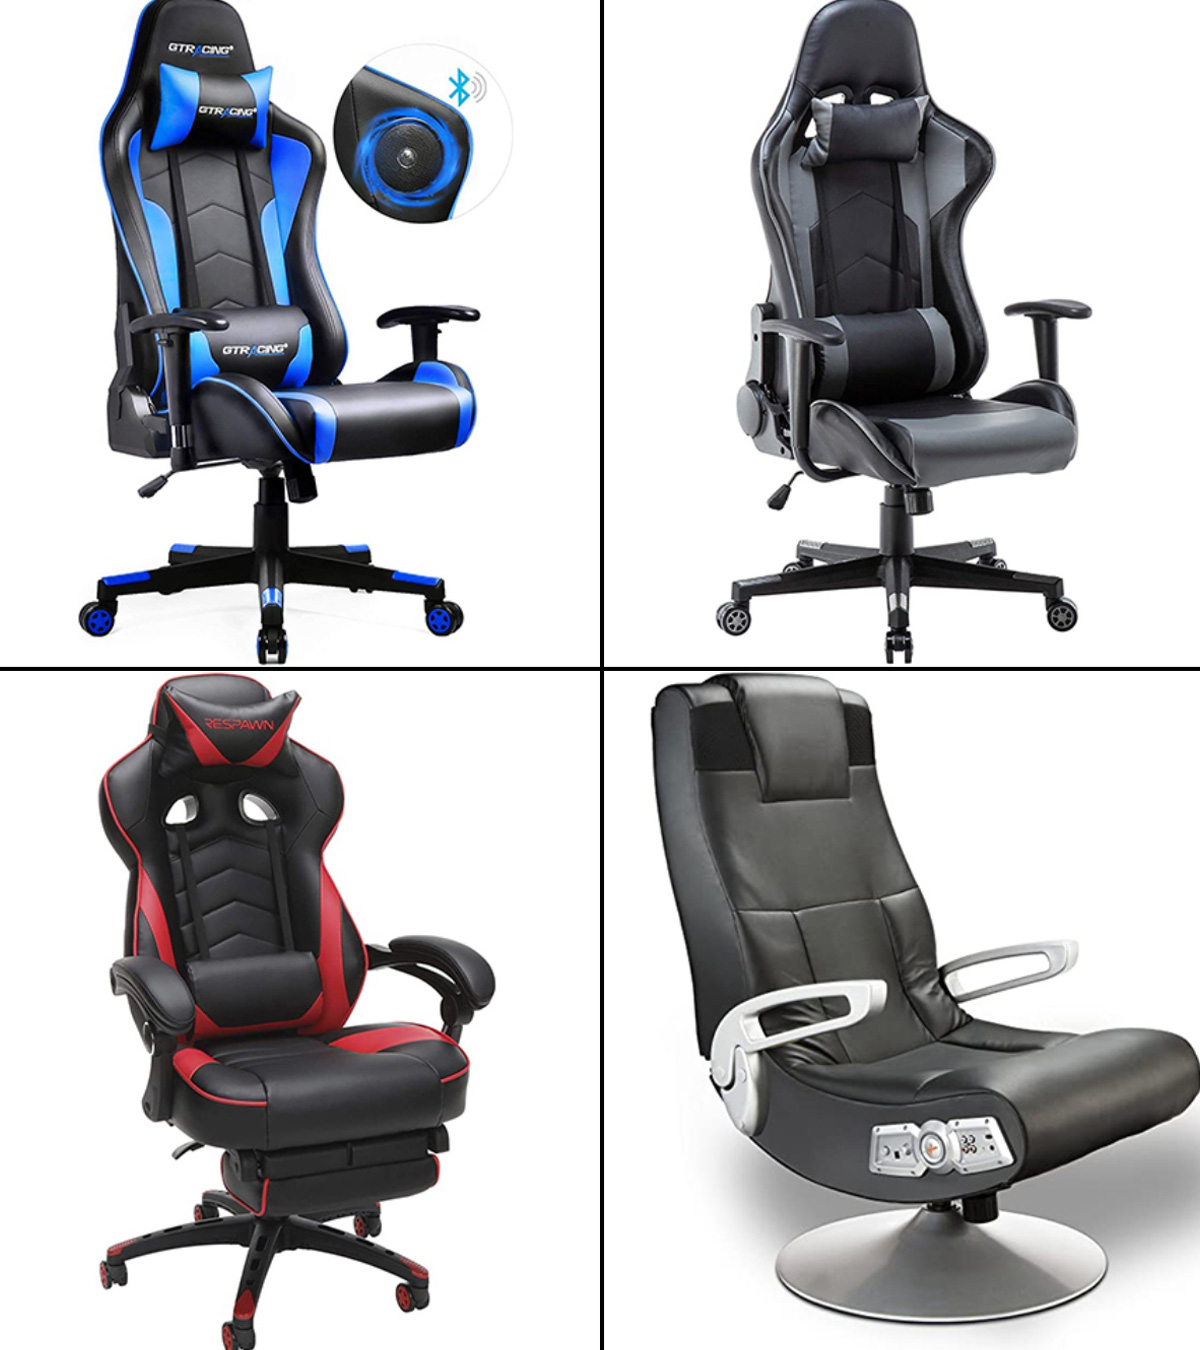 https://www.momjunction.com/wp-content/uploads/2020/05/Best-Gaming-Chairs-For-Kids1.jpg